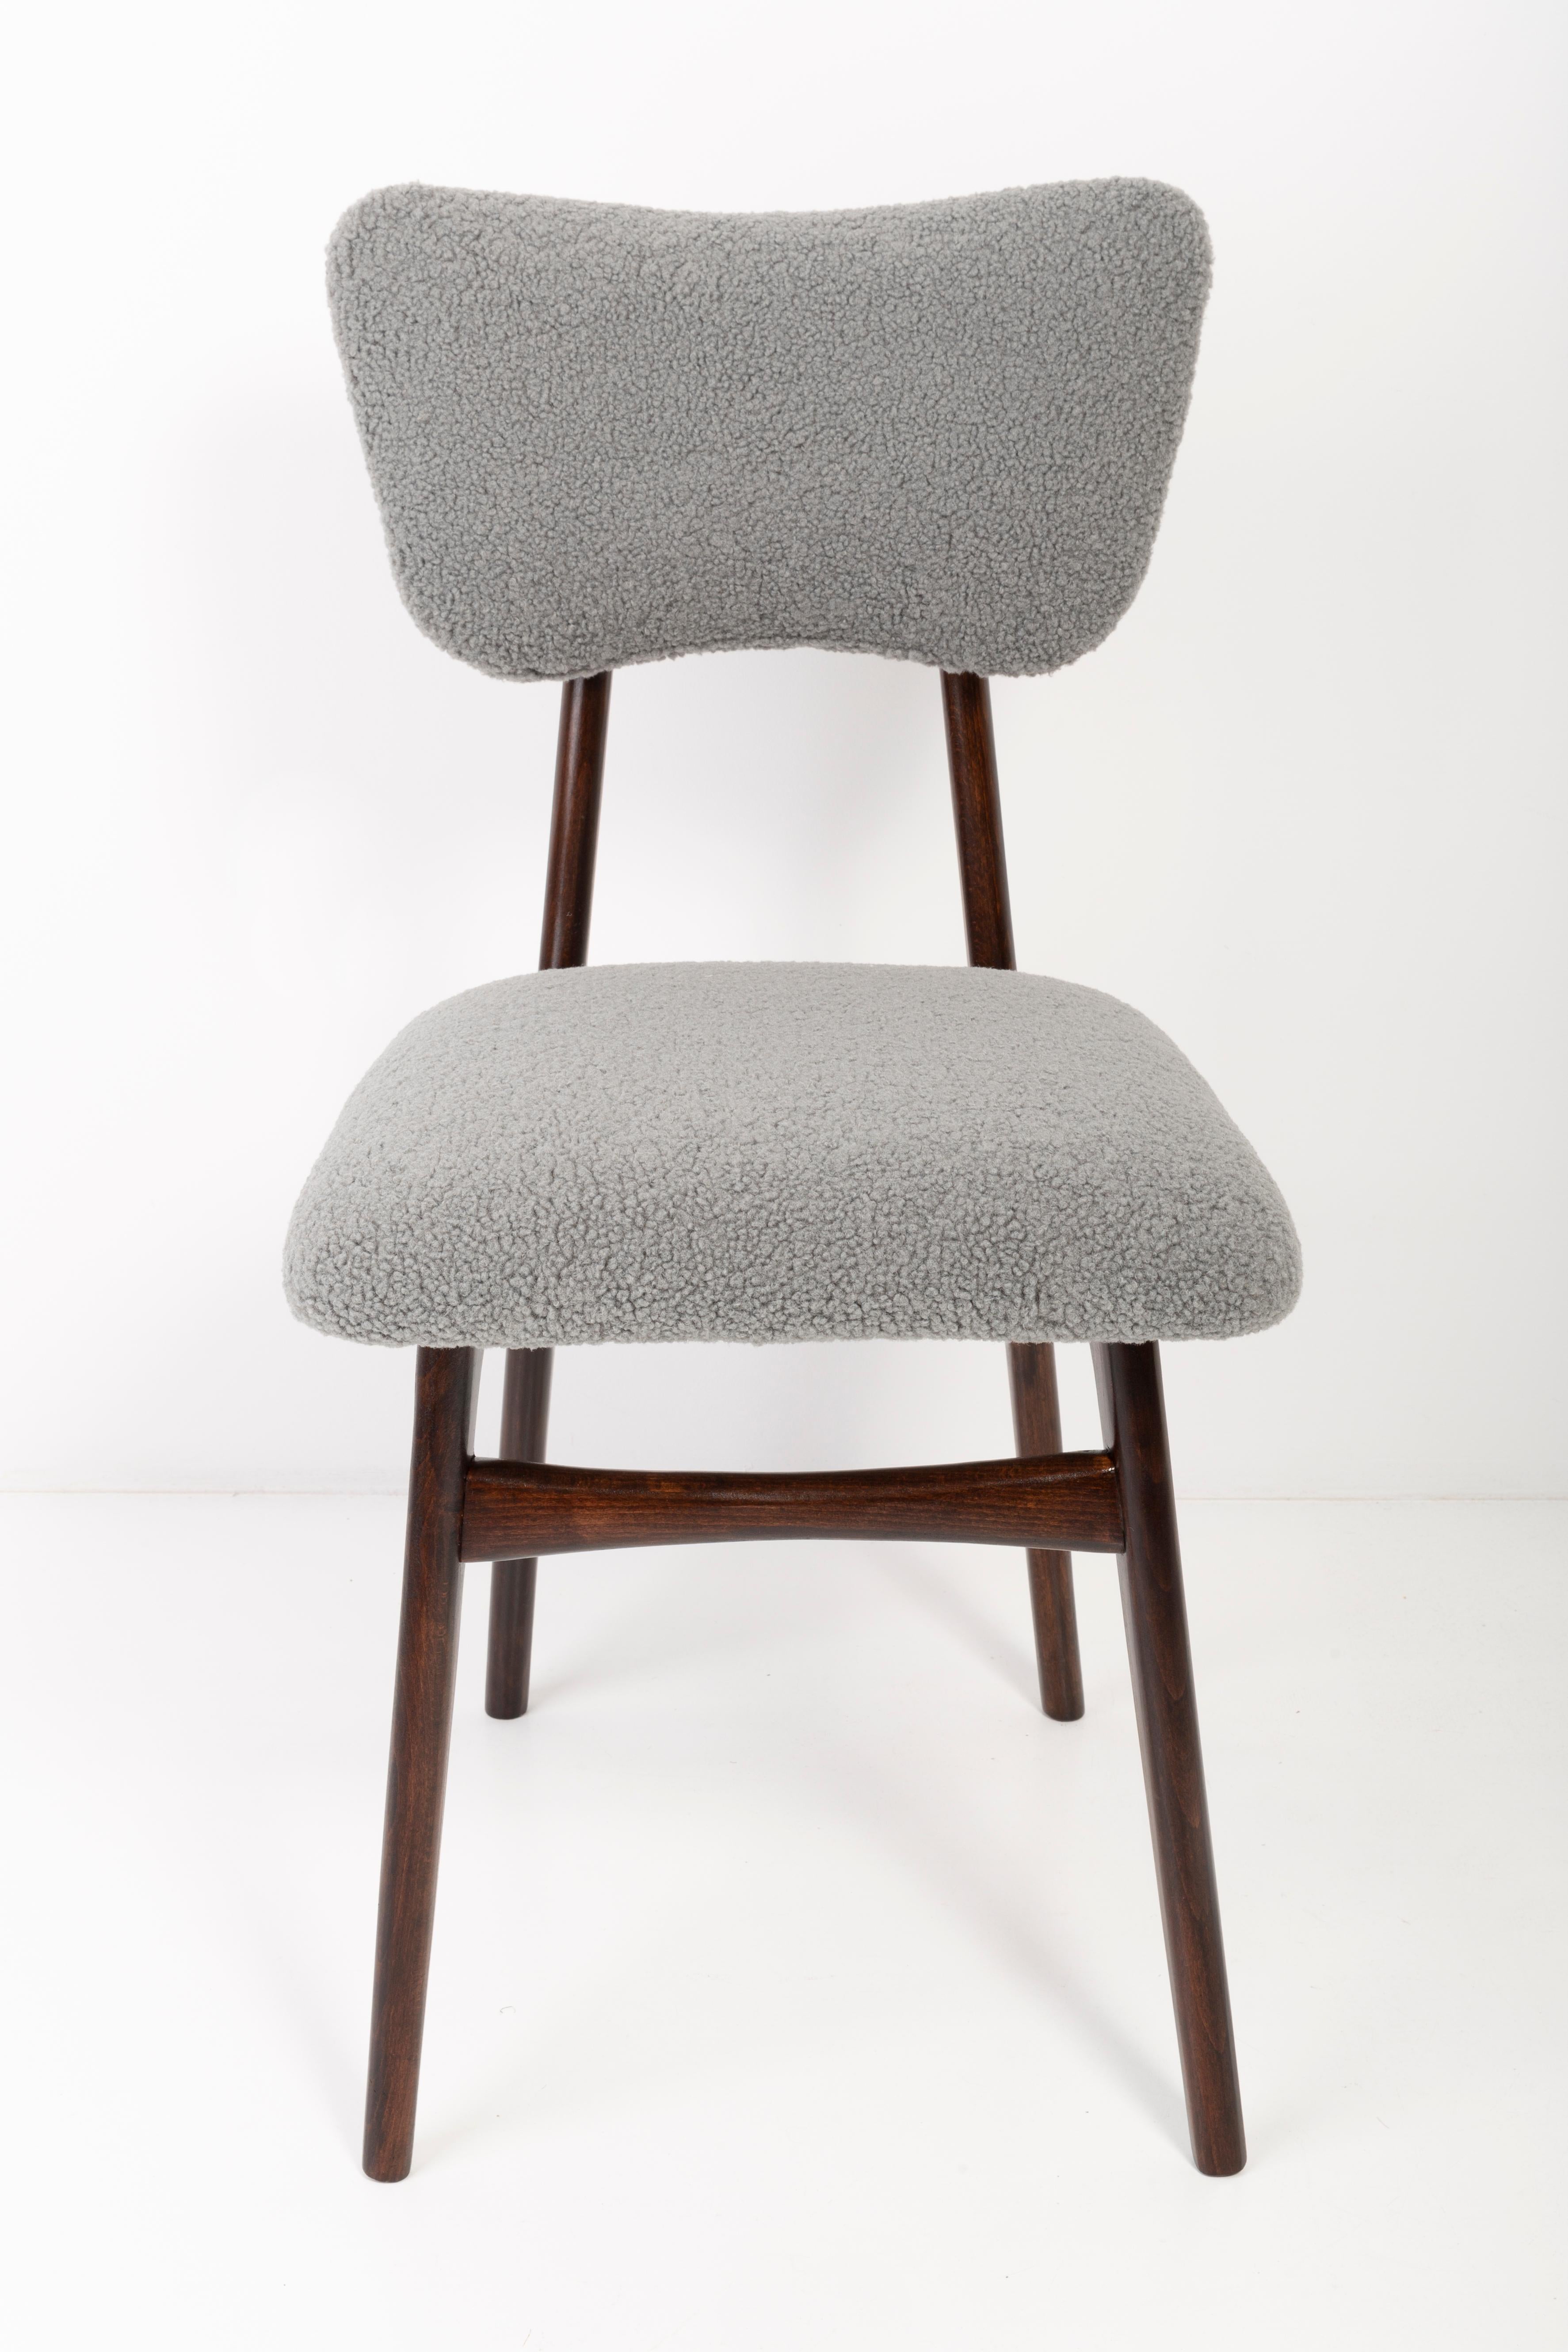 Set of Twelve 20th Century Gray Boucle Chairs, 1960s For Sale 5